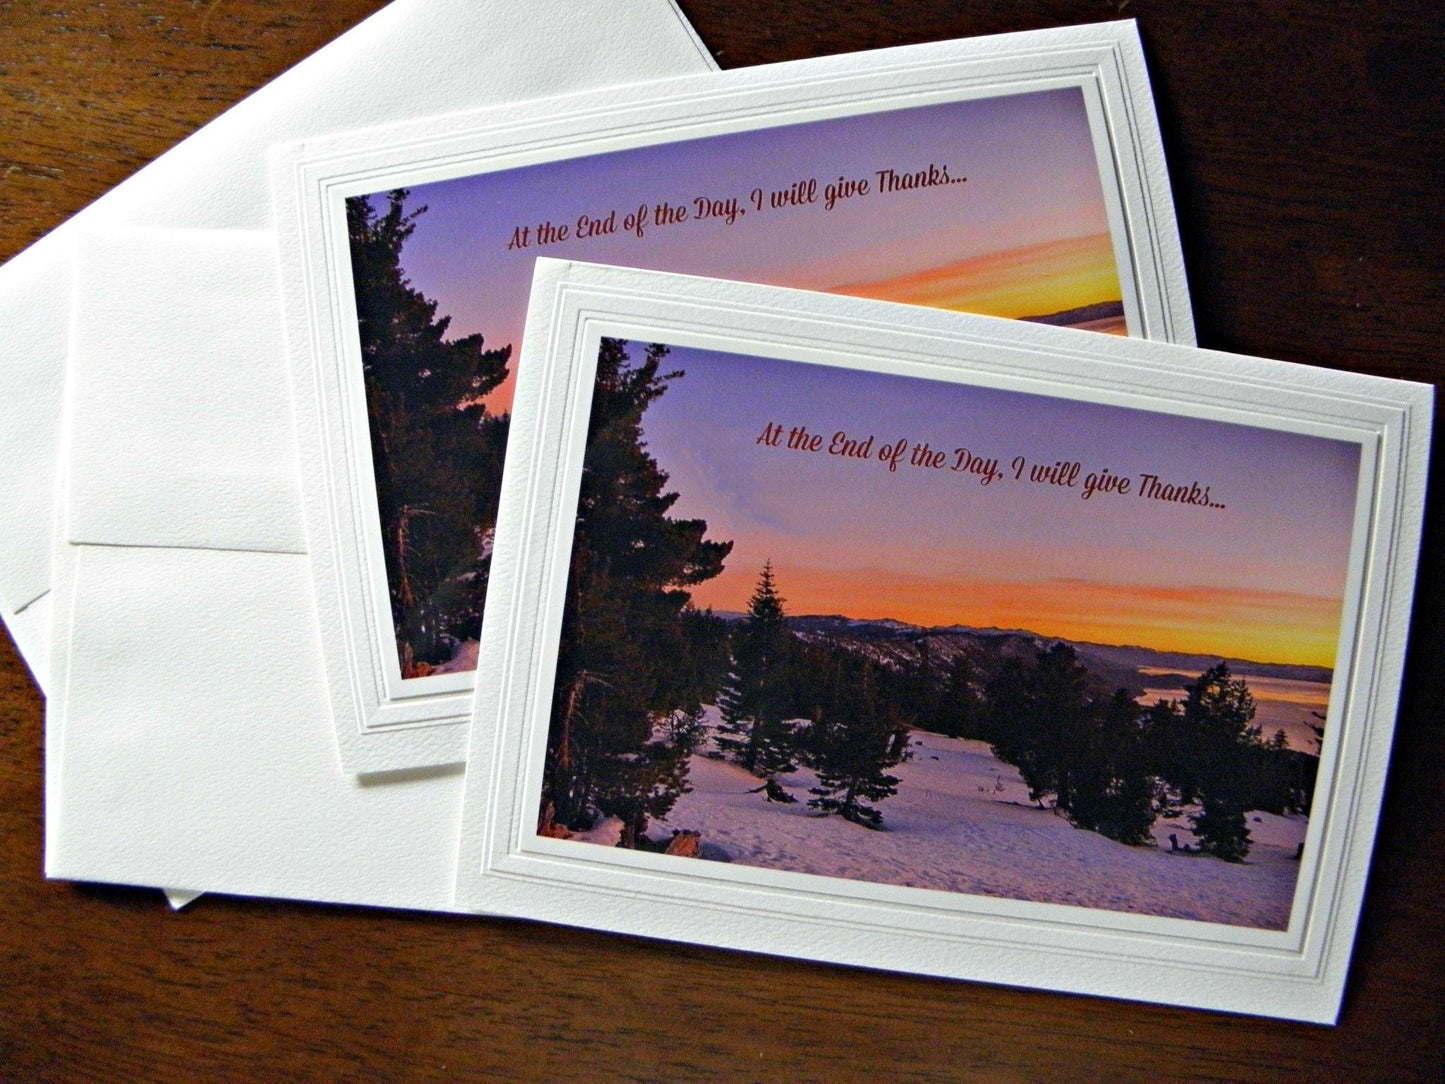 Photo of the card with "At the End of the Day, I will give Thanks..." printed at the top of the image